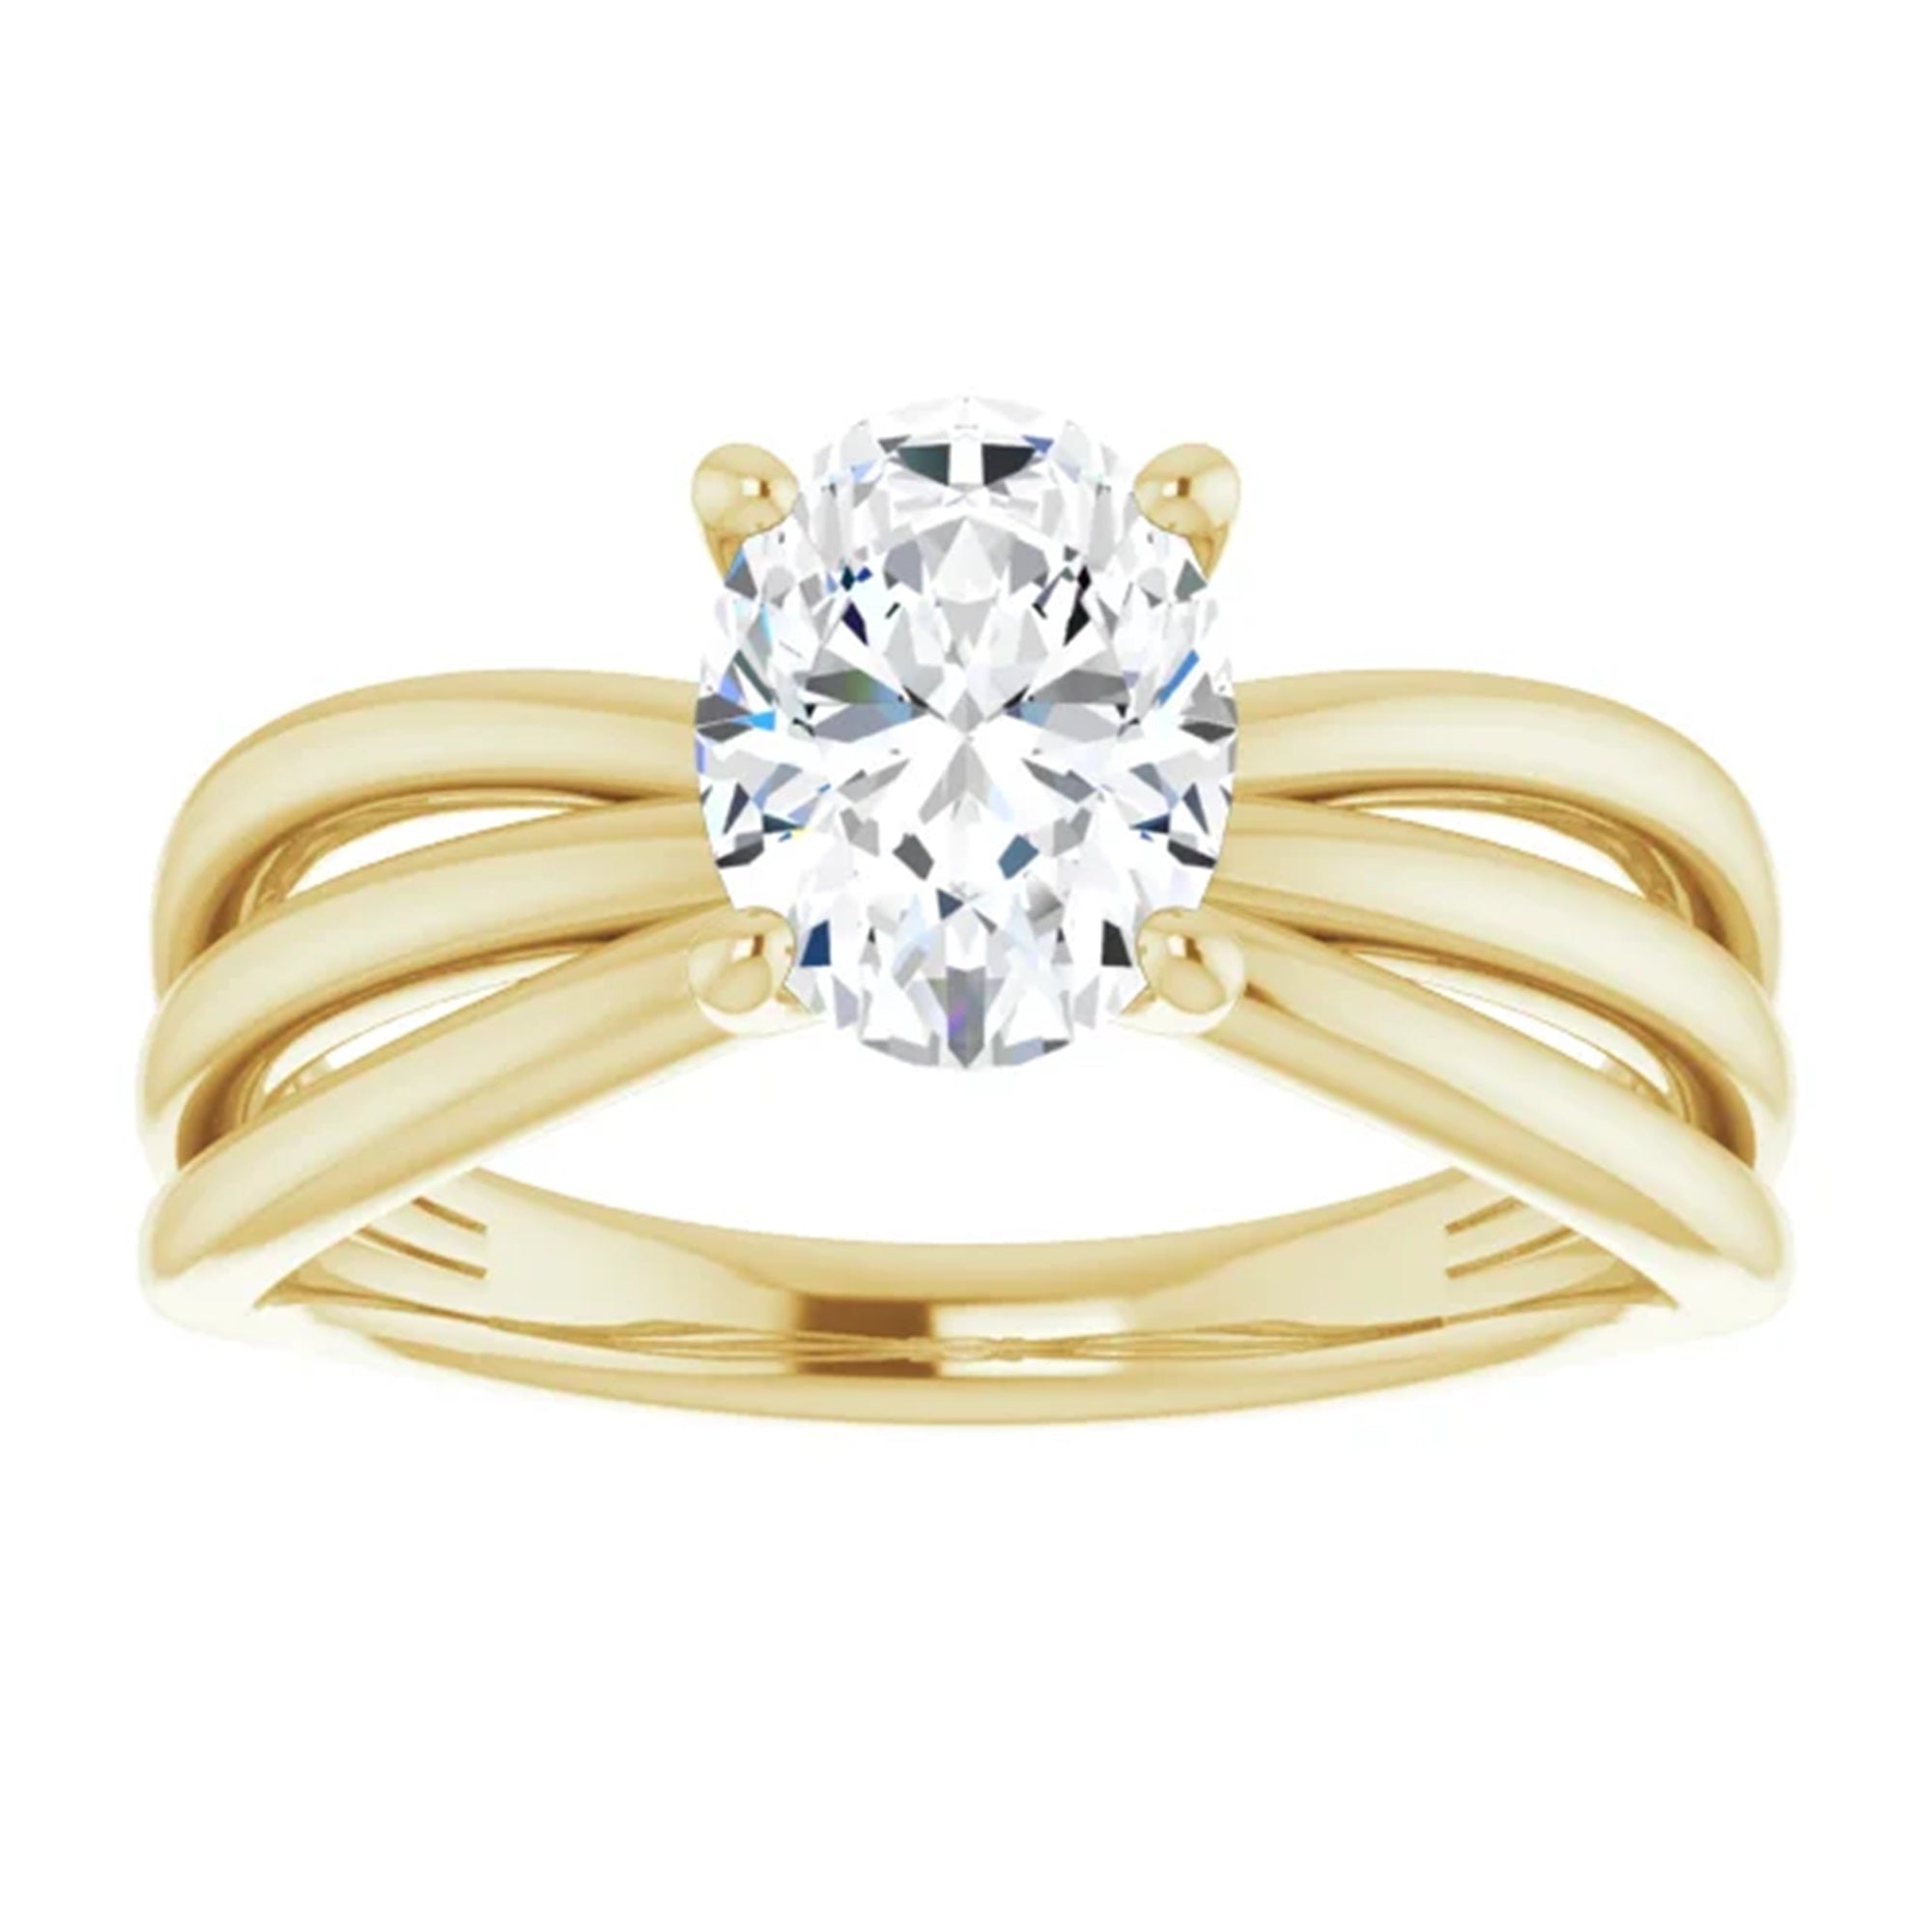 Oval Diamond Engagement Ring in solid 14k Gold